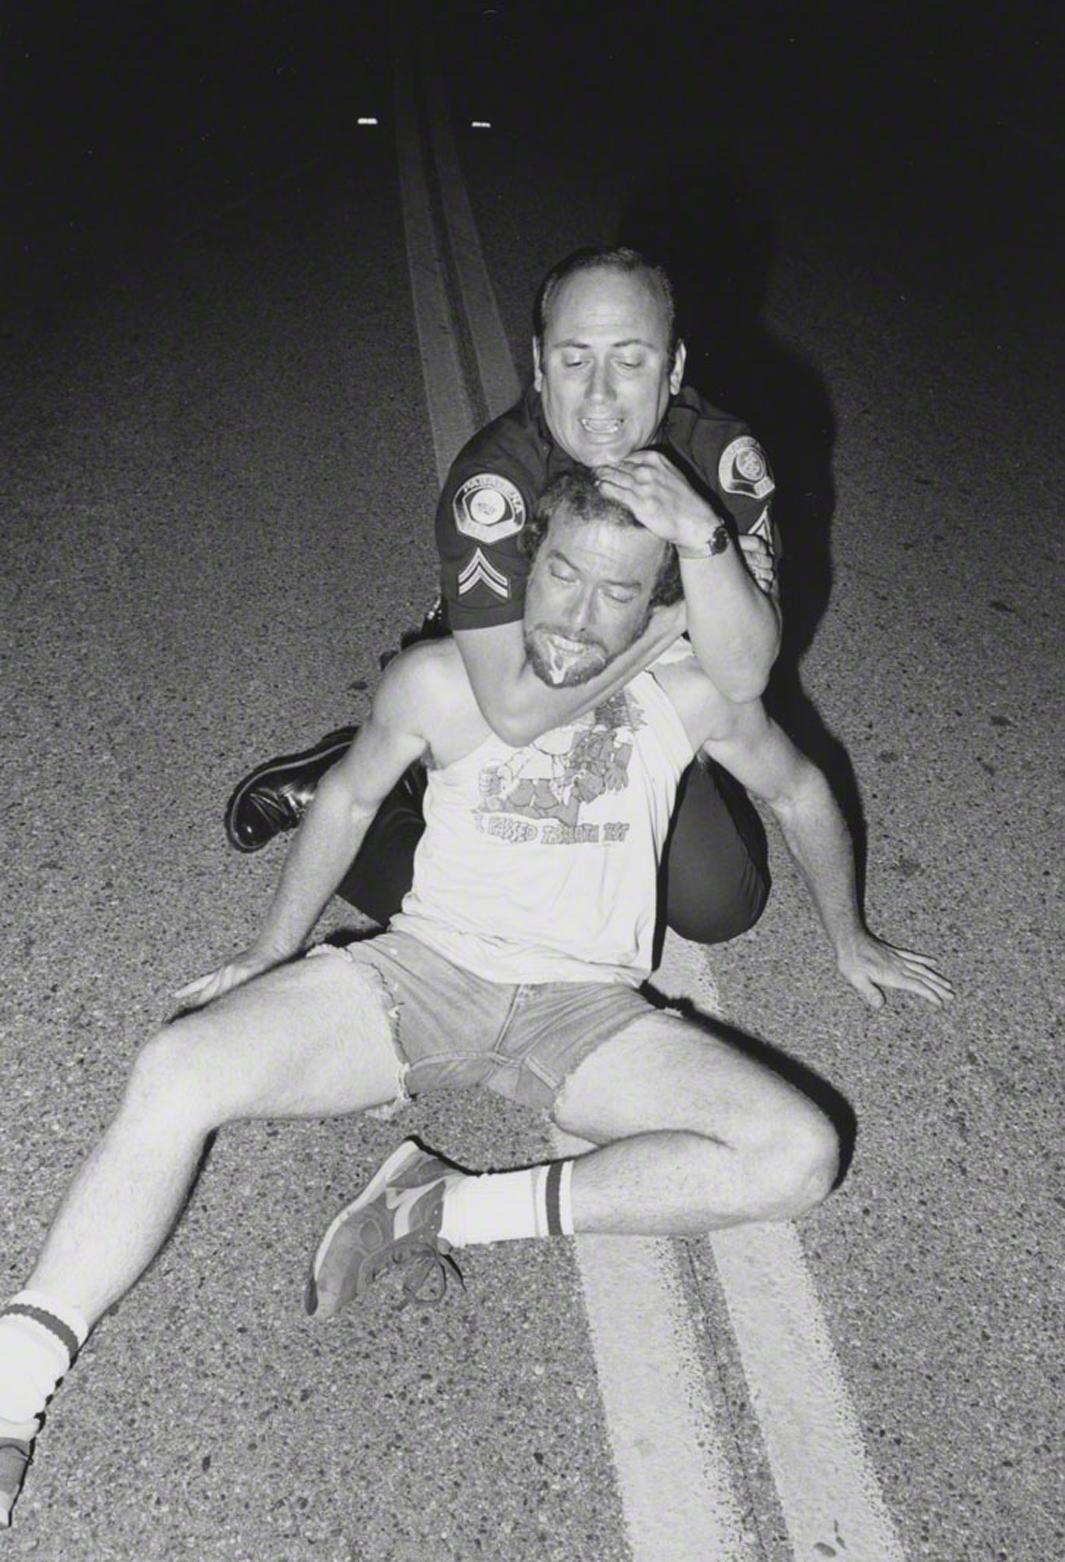 6/7/86 Agent Baroni applying carotid hold to suspect under the influence of PCP who attacked our police car. (note that the suspect's T-shirt says "I passed the Breath Test"). Melrose Avenue and Avenue 64.